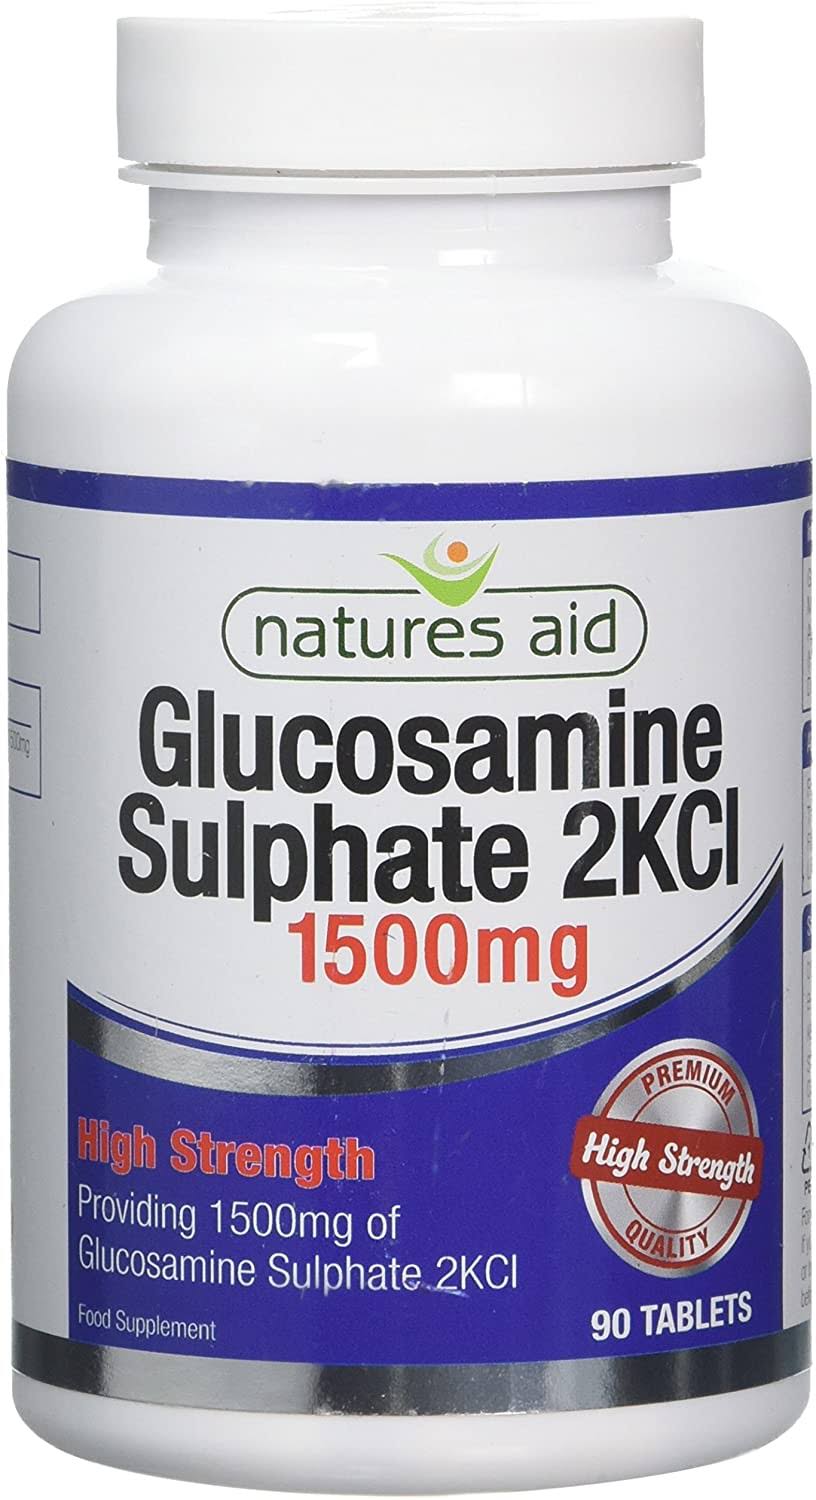 Natures Aid Glucosamine Sulphate - 90 Tablets